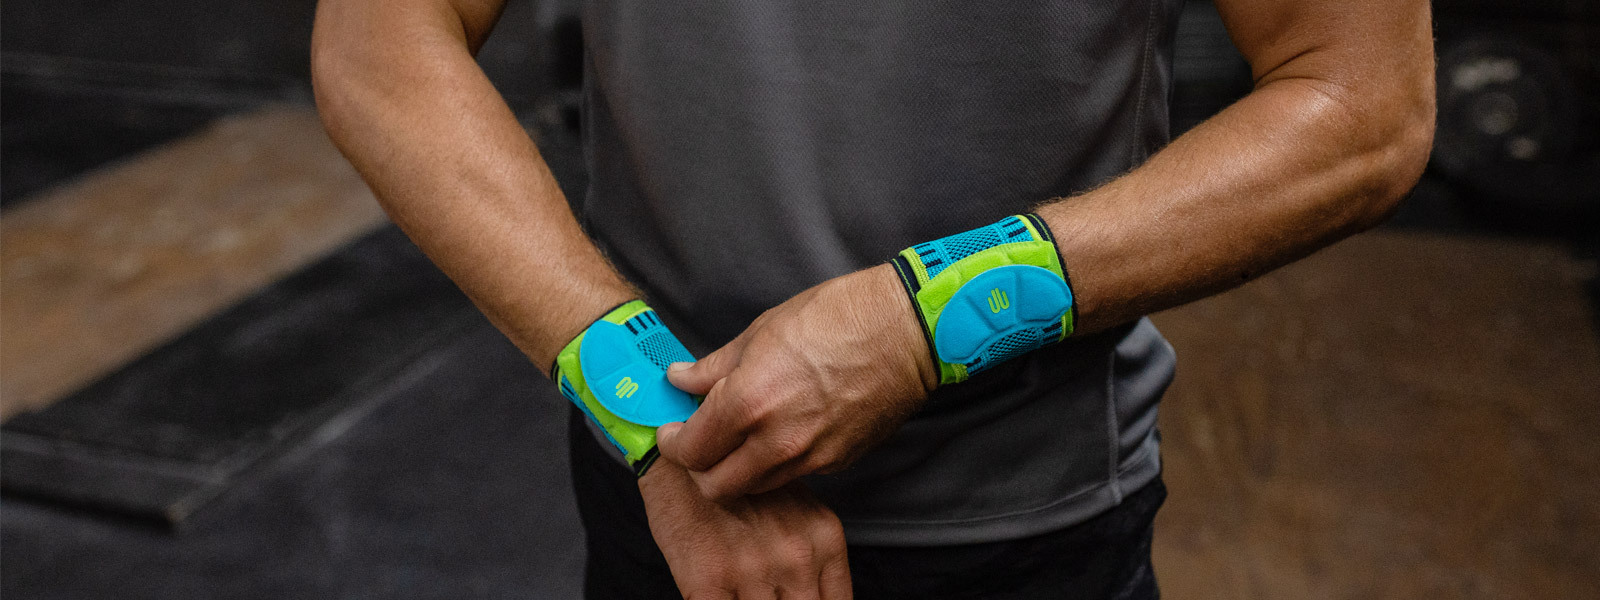 Man in the fitness room rightly pulls one of his wrist bandages